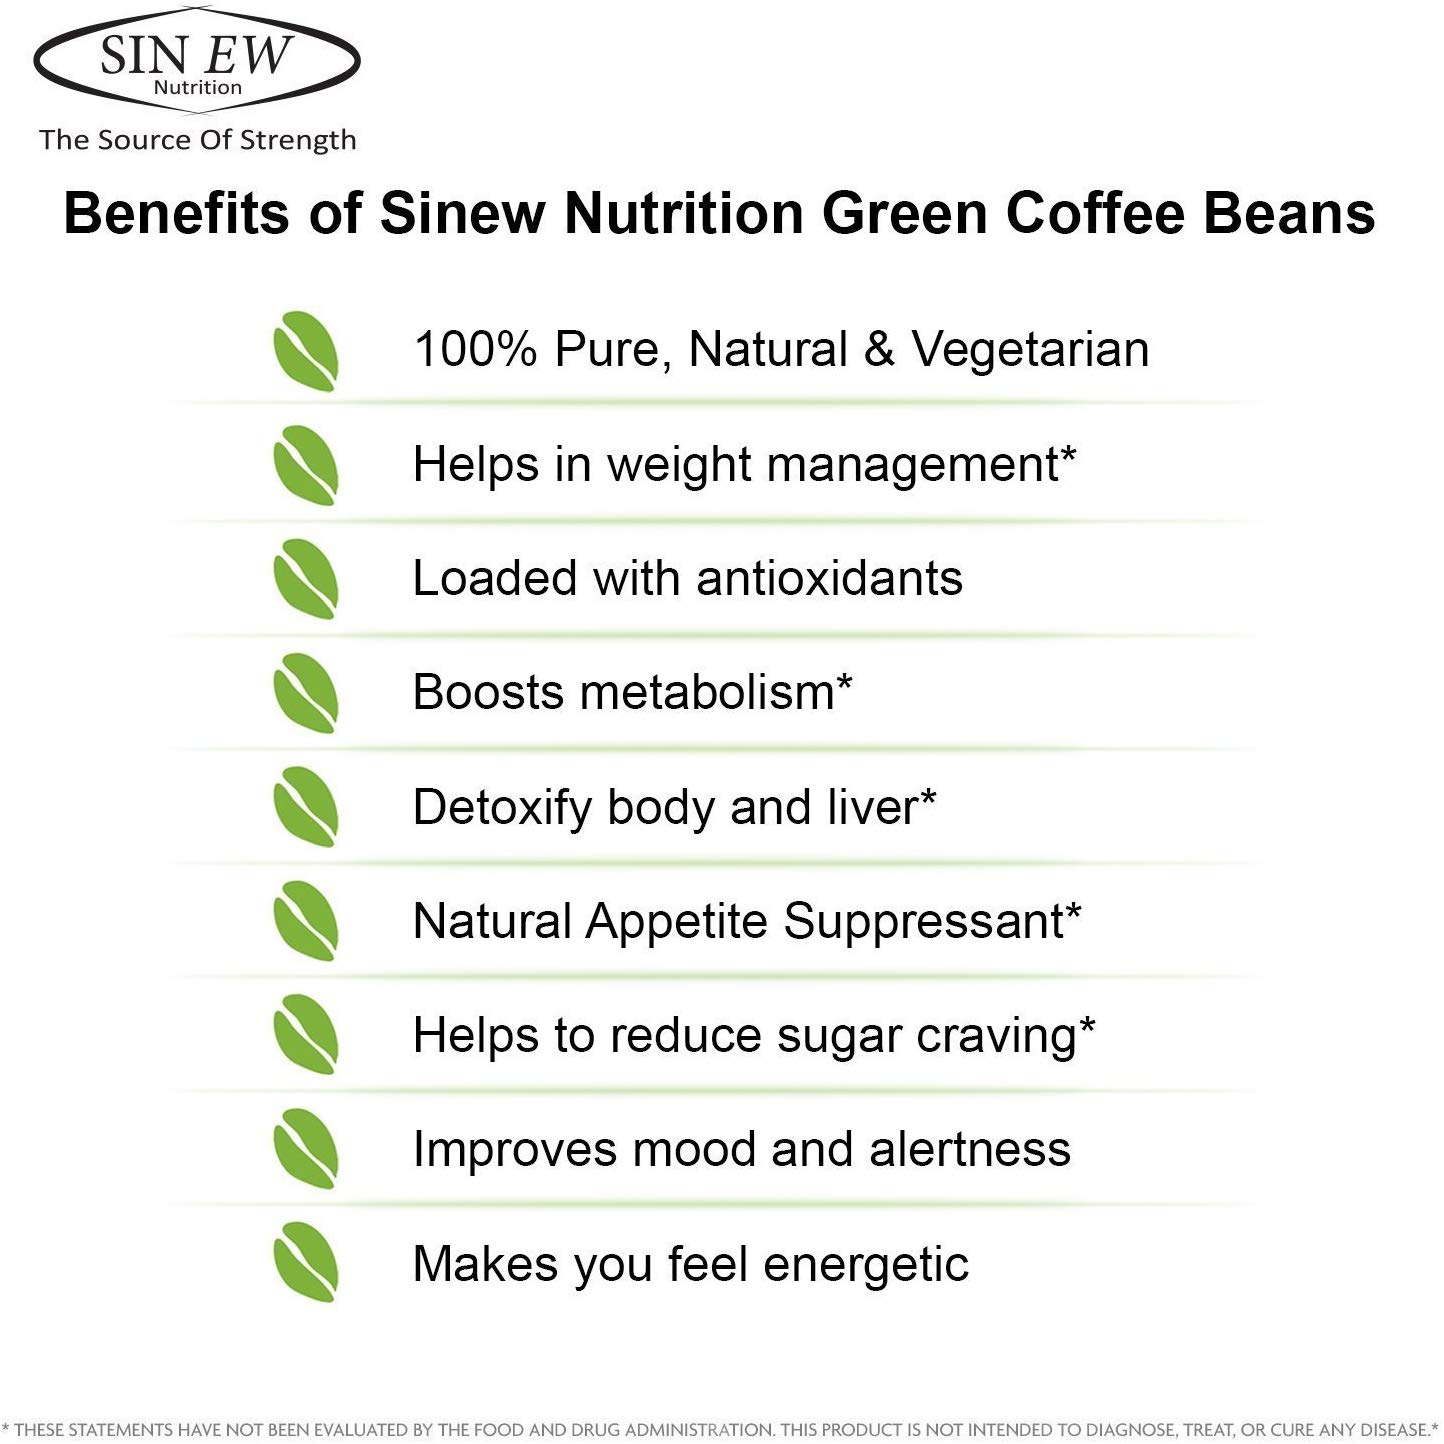 Buy Sinew Nutrition Green Coffee Beans for Weight Management - 400 g + 100  g Free (250 g x 2 Piece) Online in India - SinewNutrition.com